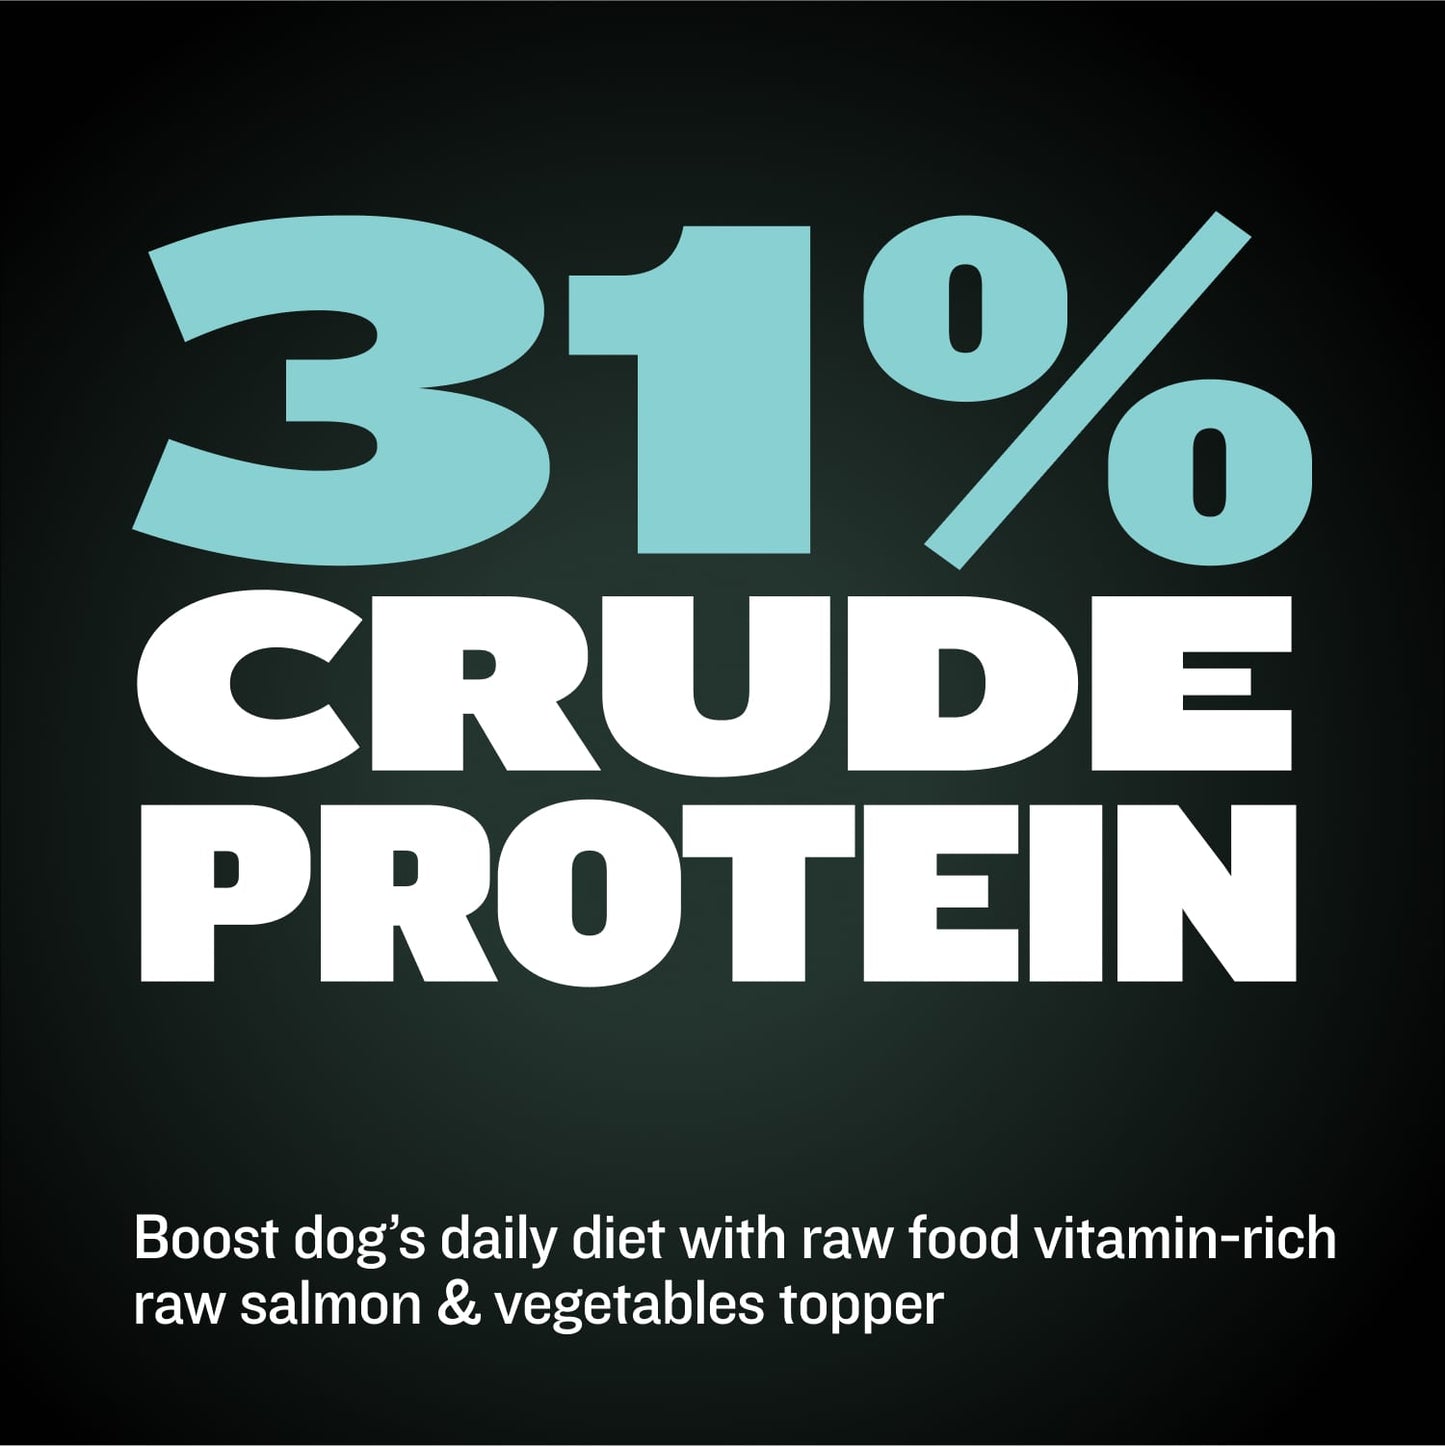 Freeze-Dried Raw Dog Food Toppers Salmon Flavor